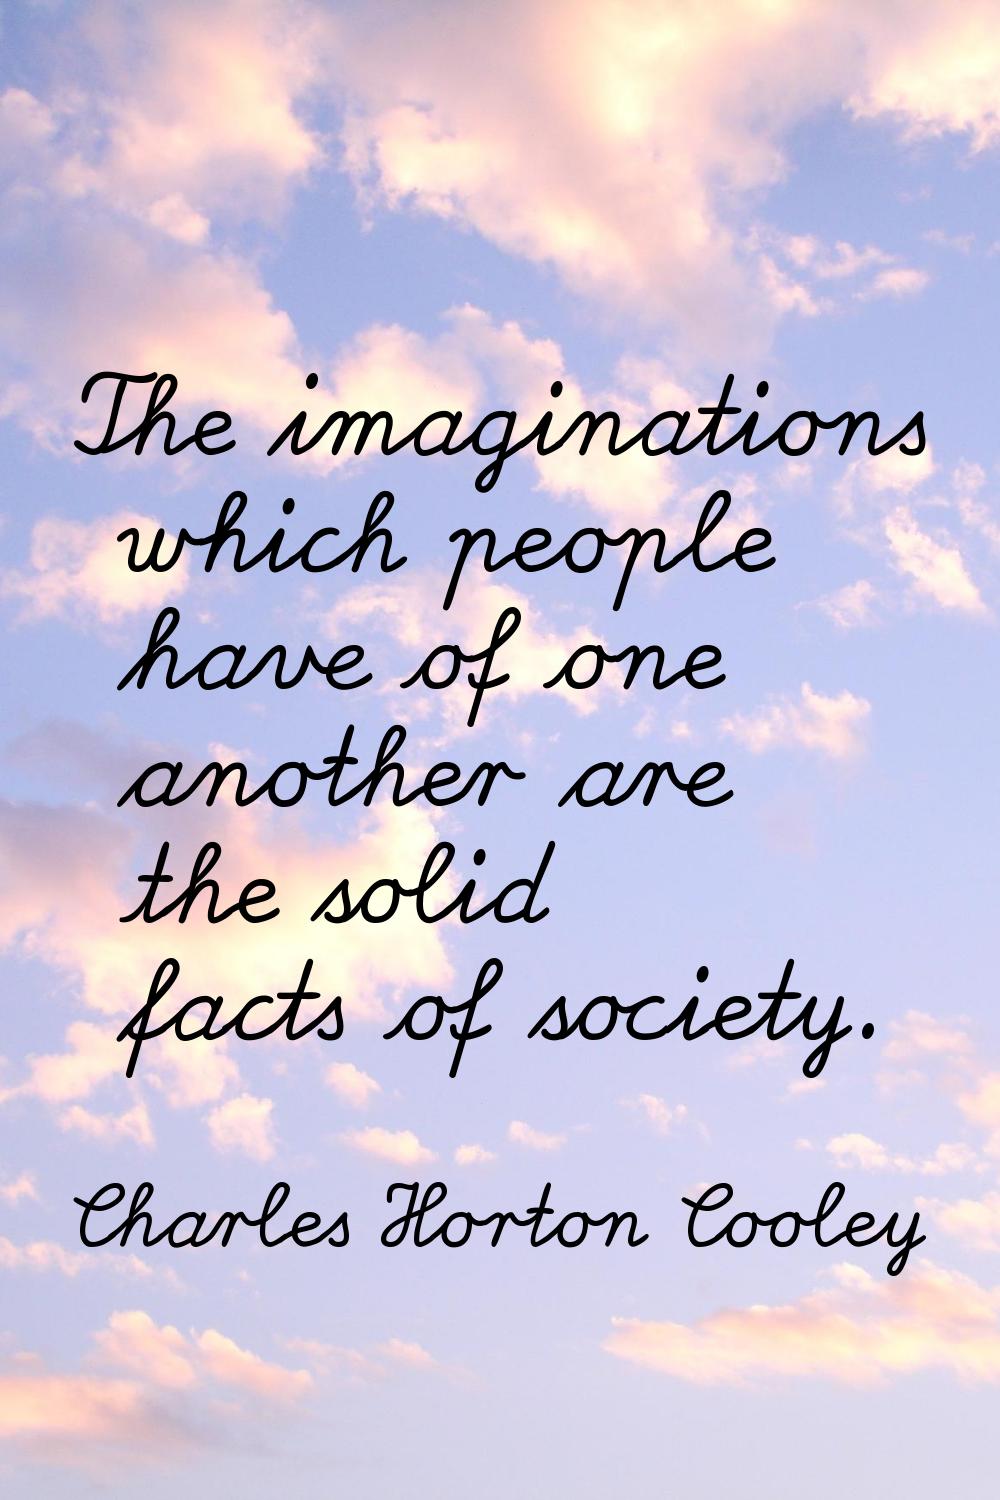 The imaginations which people have of one another are the solid facts of society.